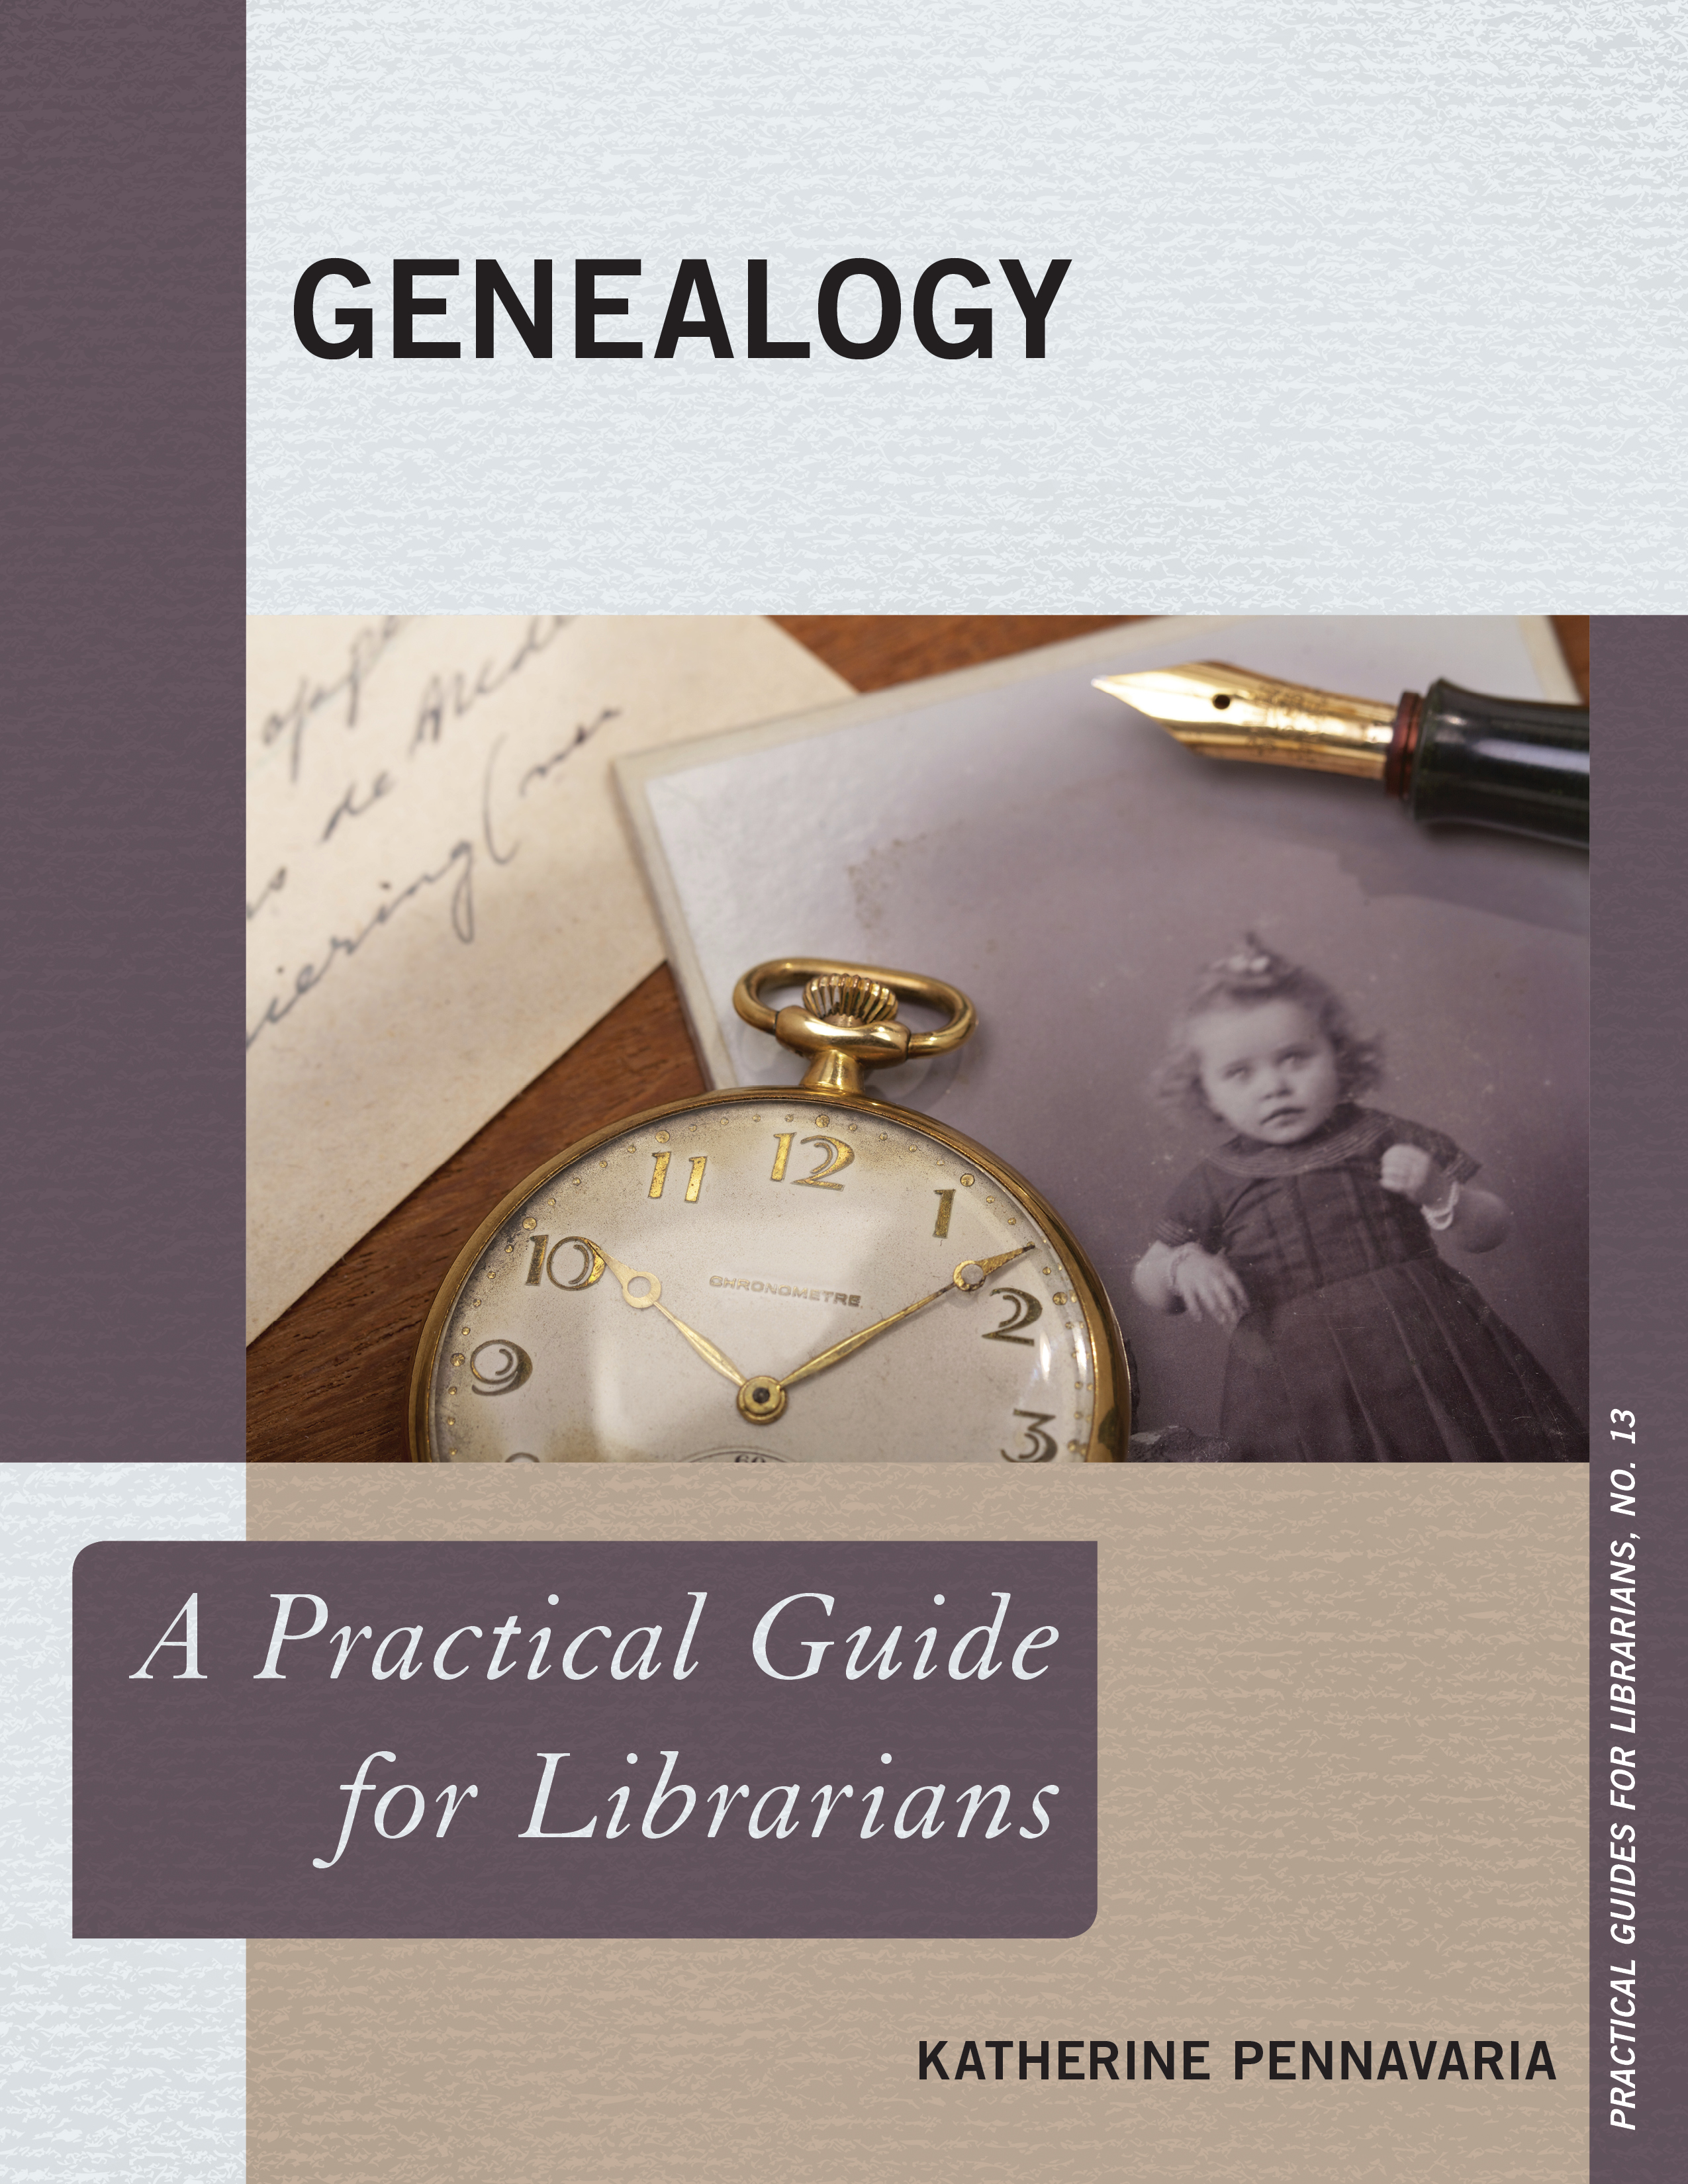 Genealogy: A Practical Guide for Librarians